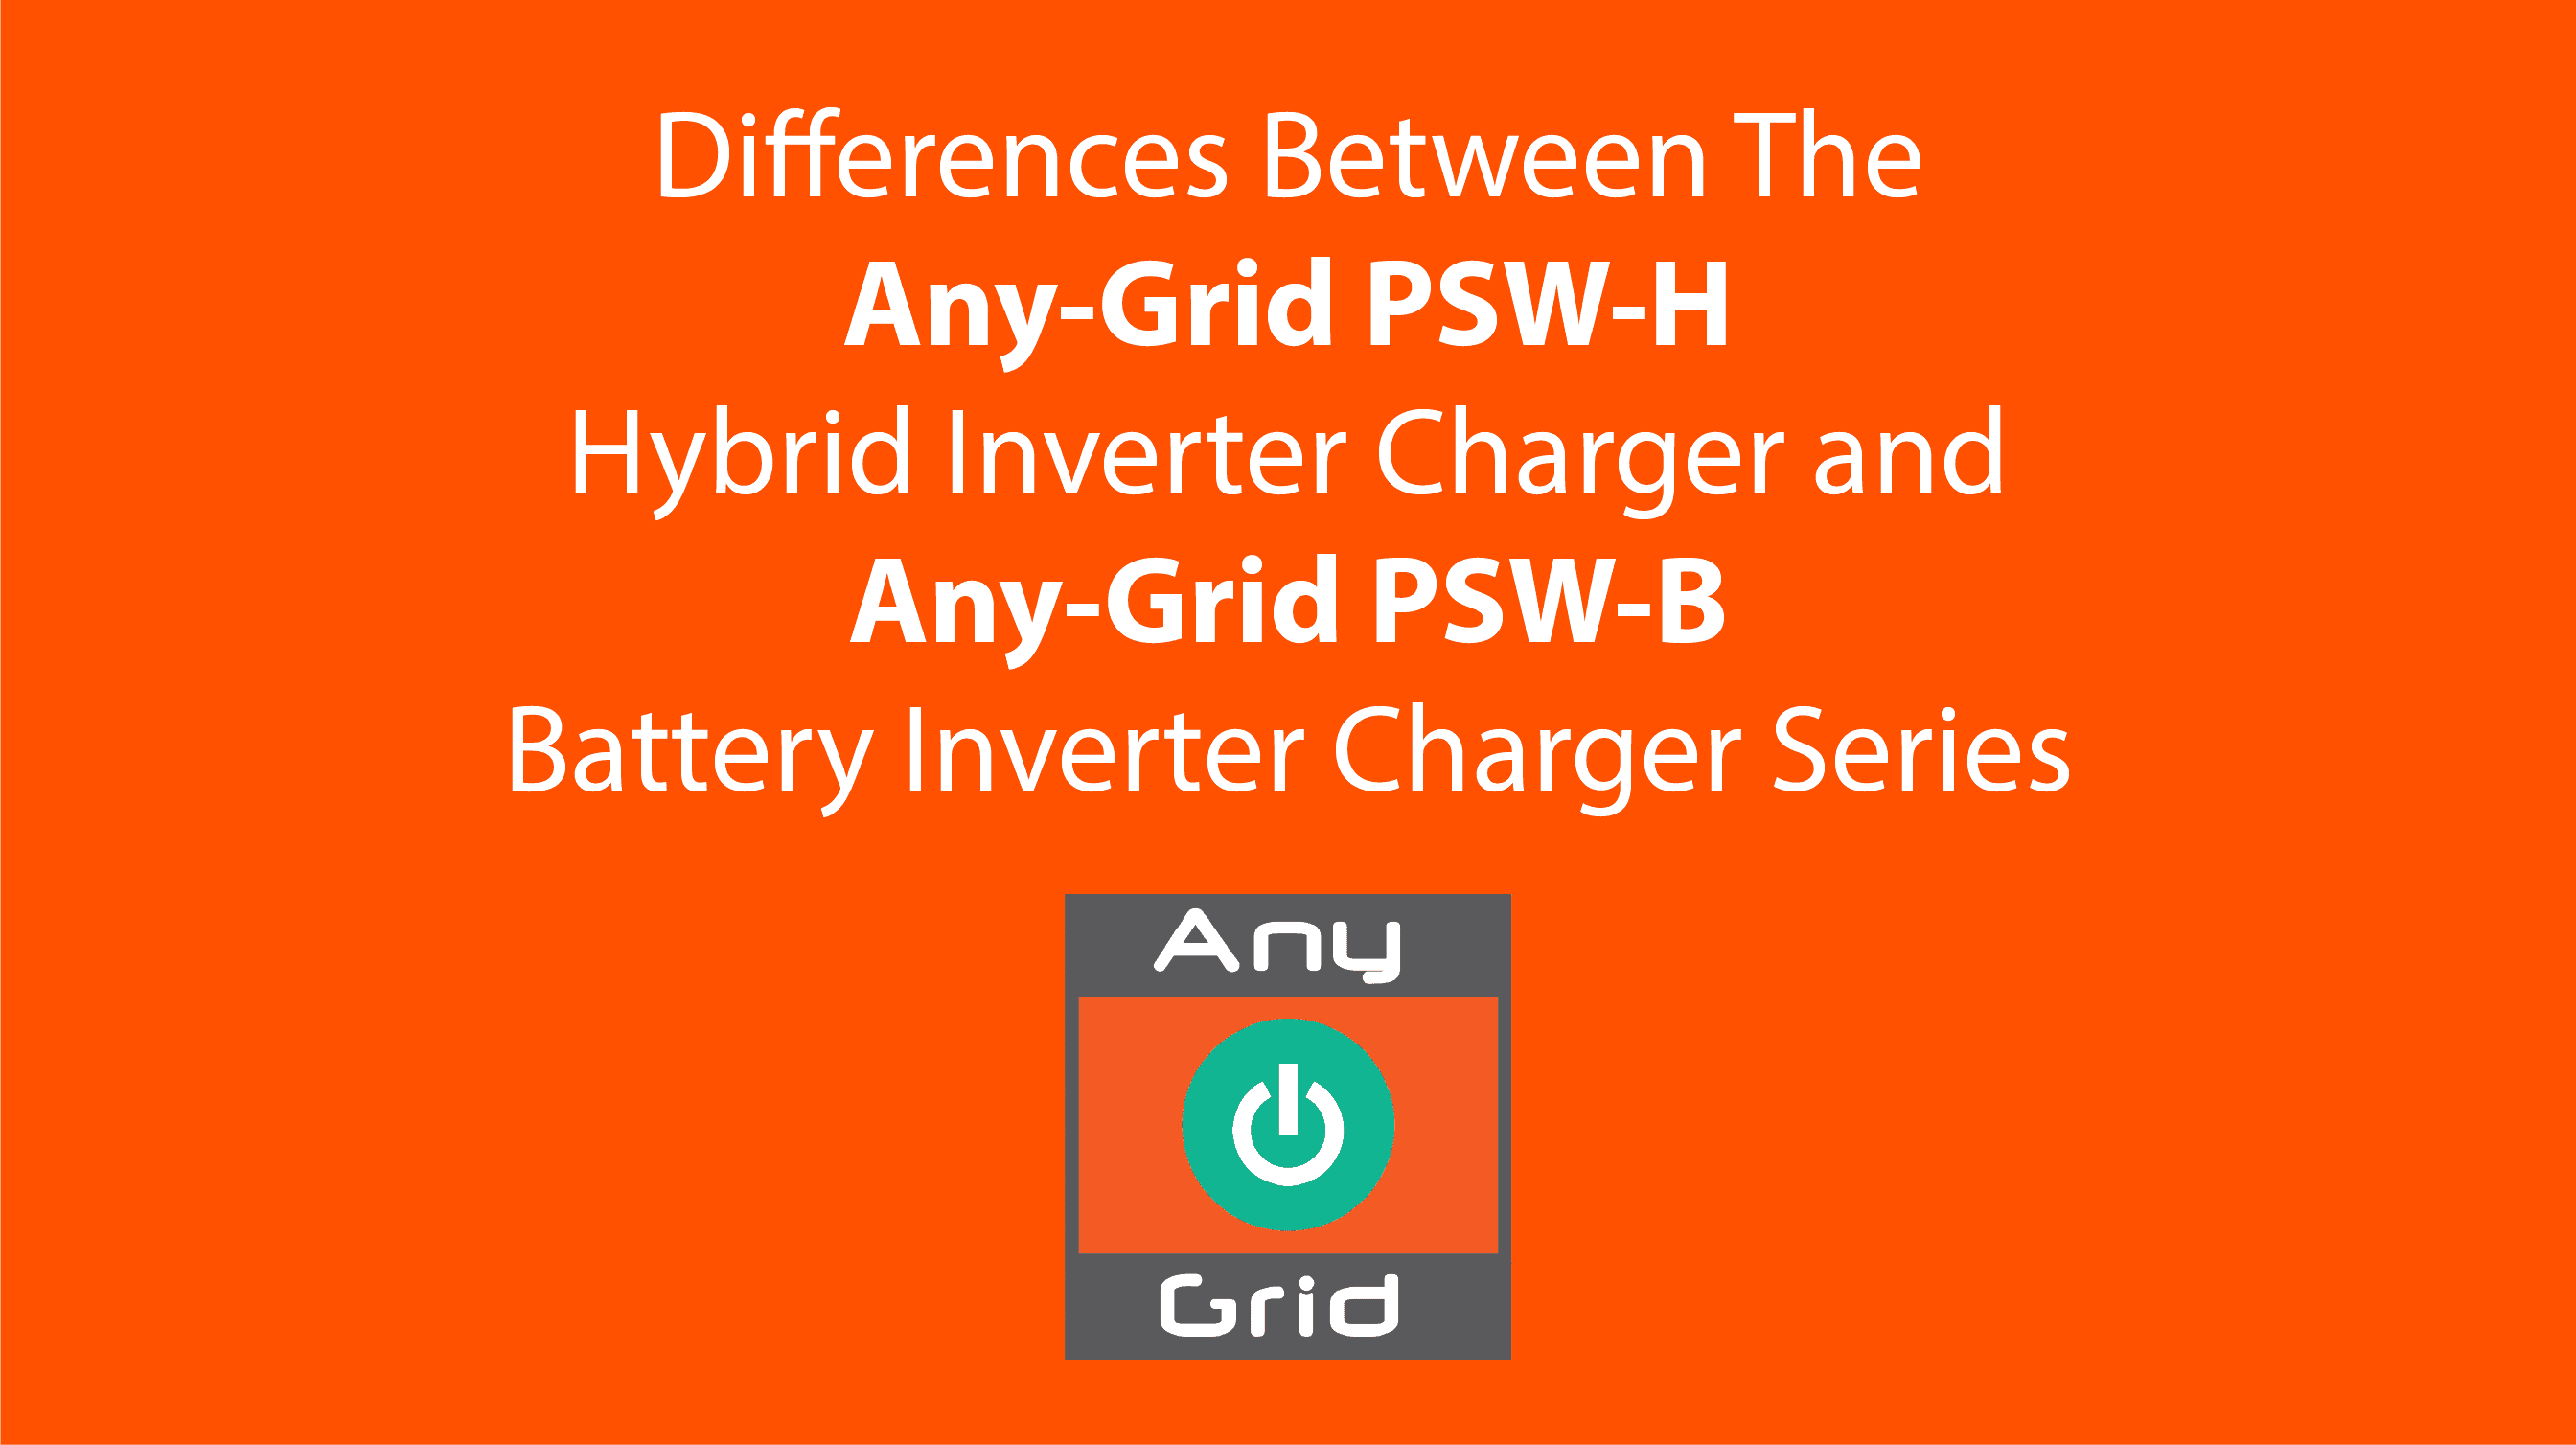 Differences between the Any-Grid PSW-H Hybrid Inverter Charger and Any-Grid PSW-B Battery Inverter Charger Series